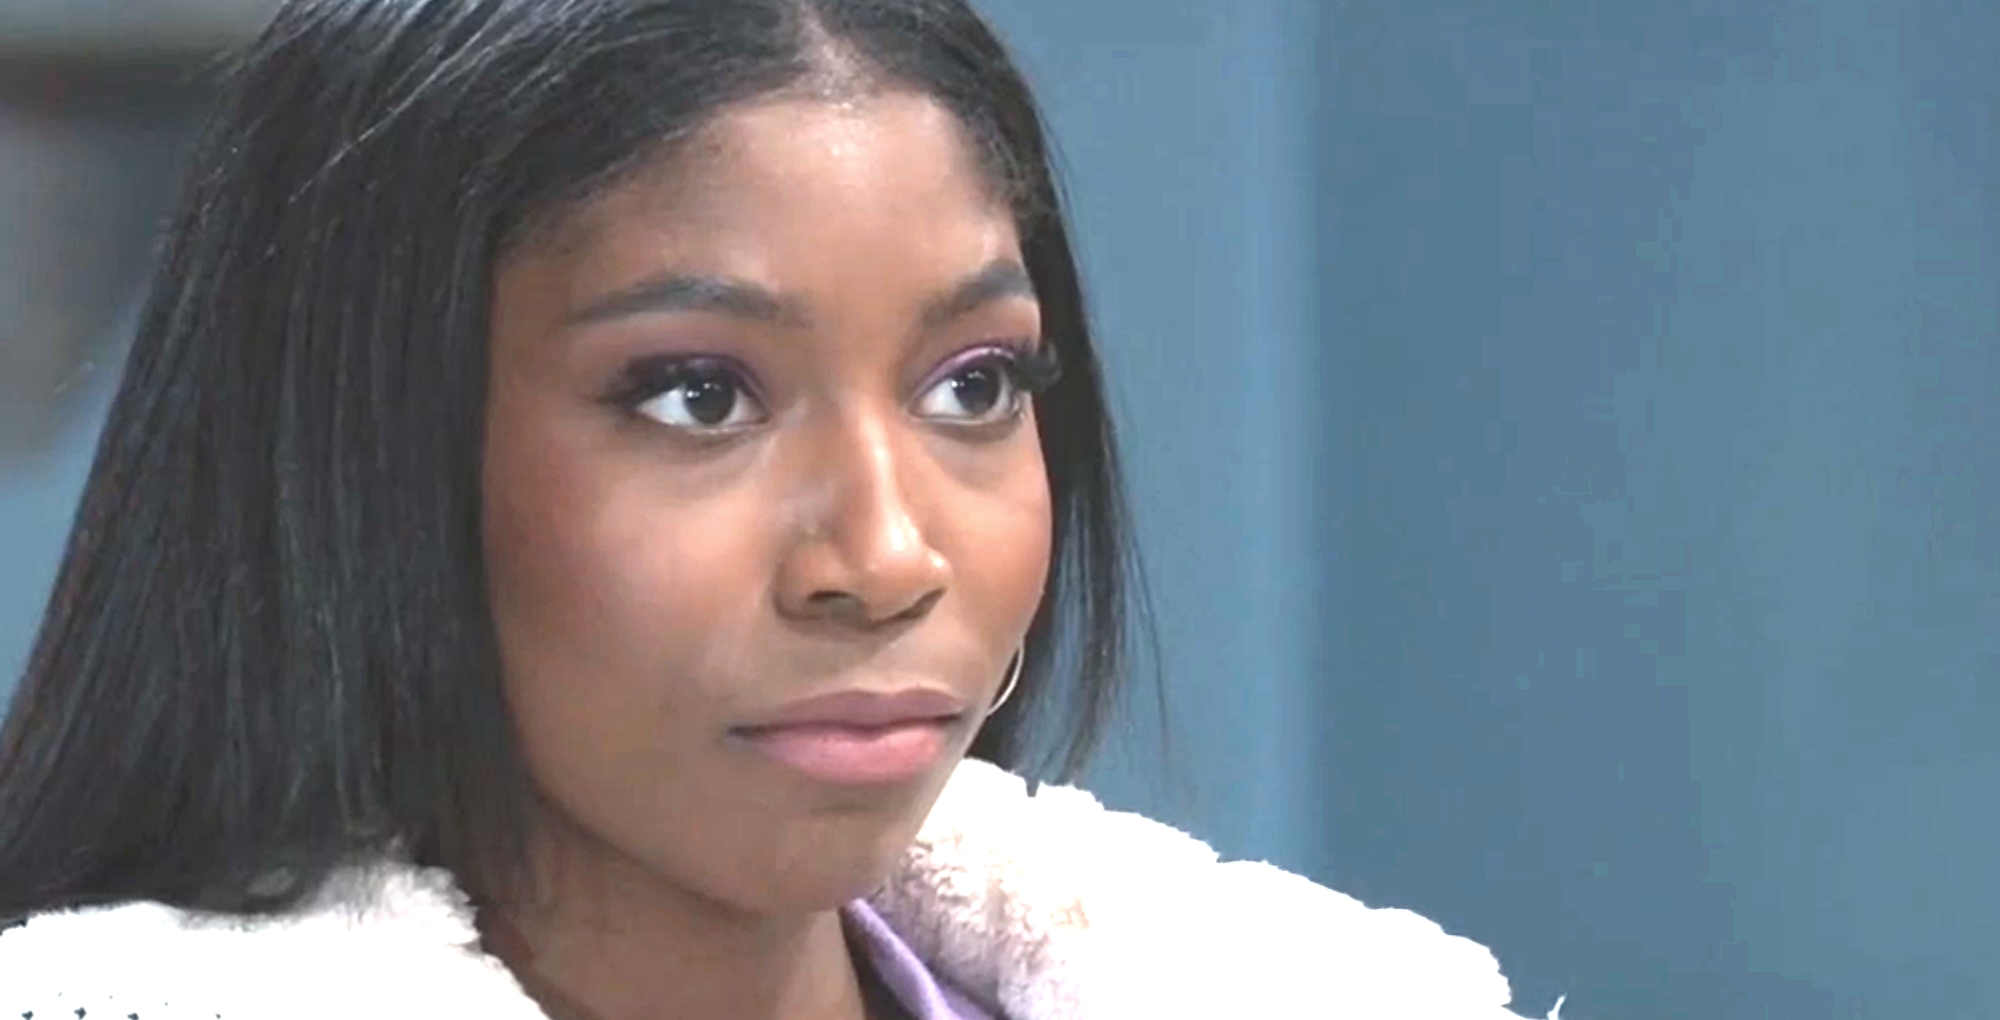 general hospital spoilers for march 16, 2023, has trina finally getting her chance